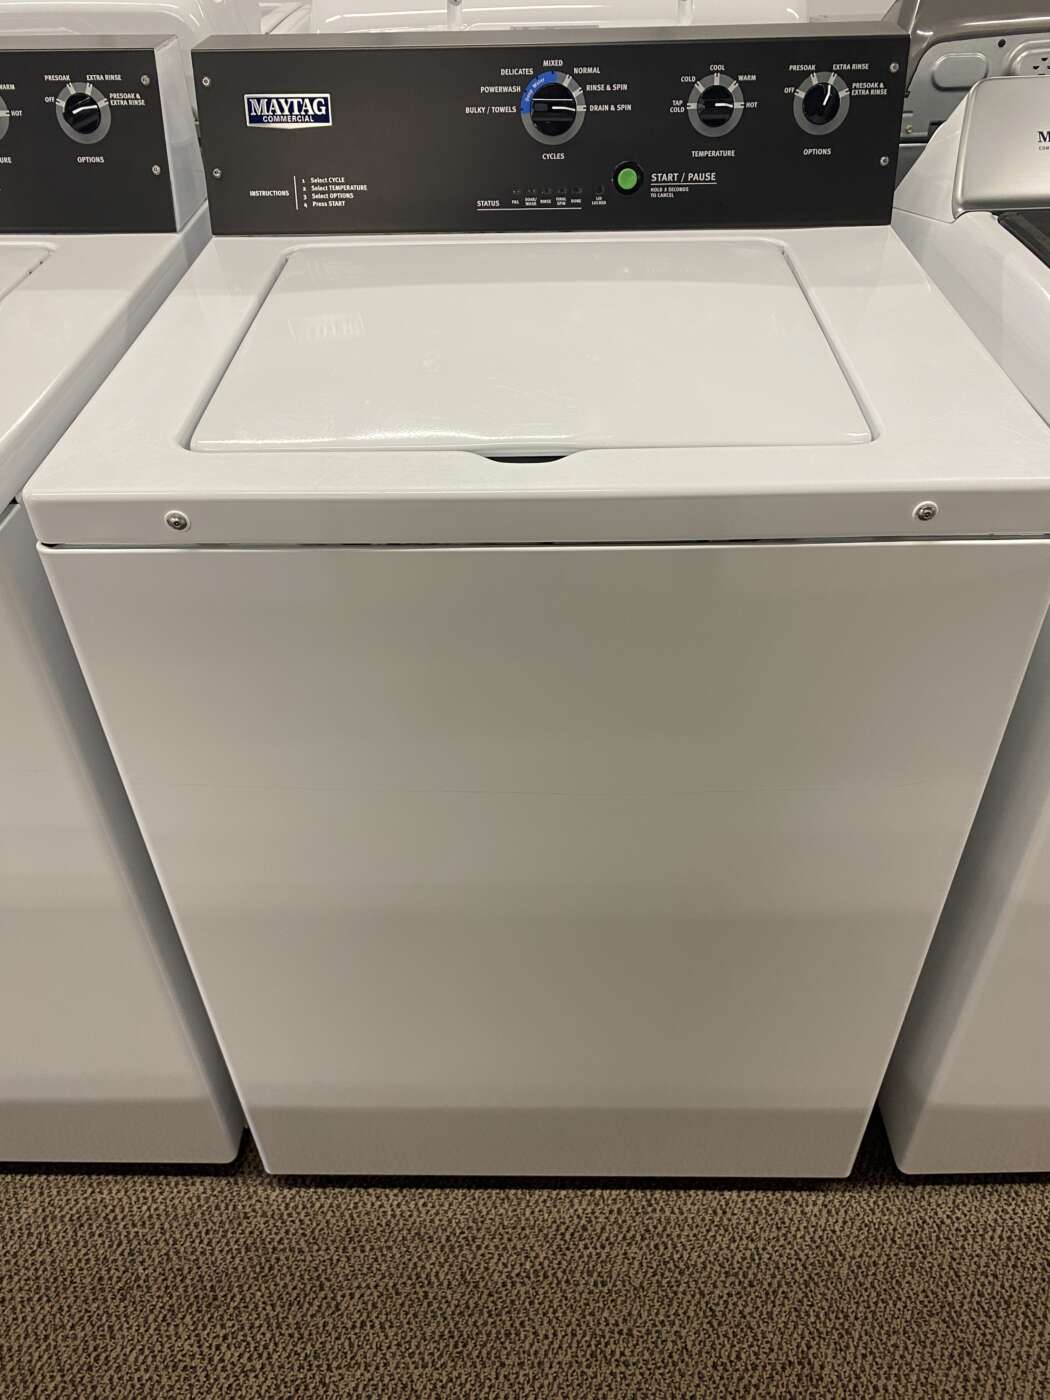 Reconditioned MAYTAG 3.5 cu. Ft. Top-Load Washer